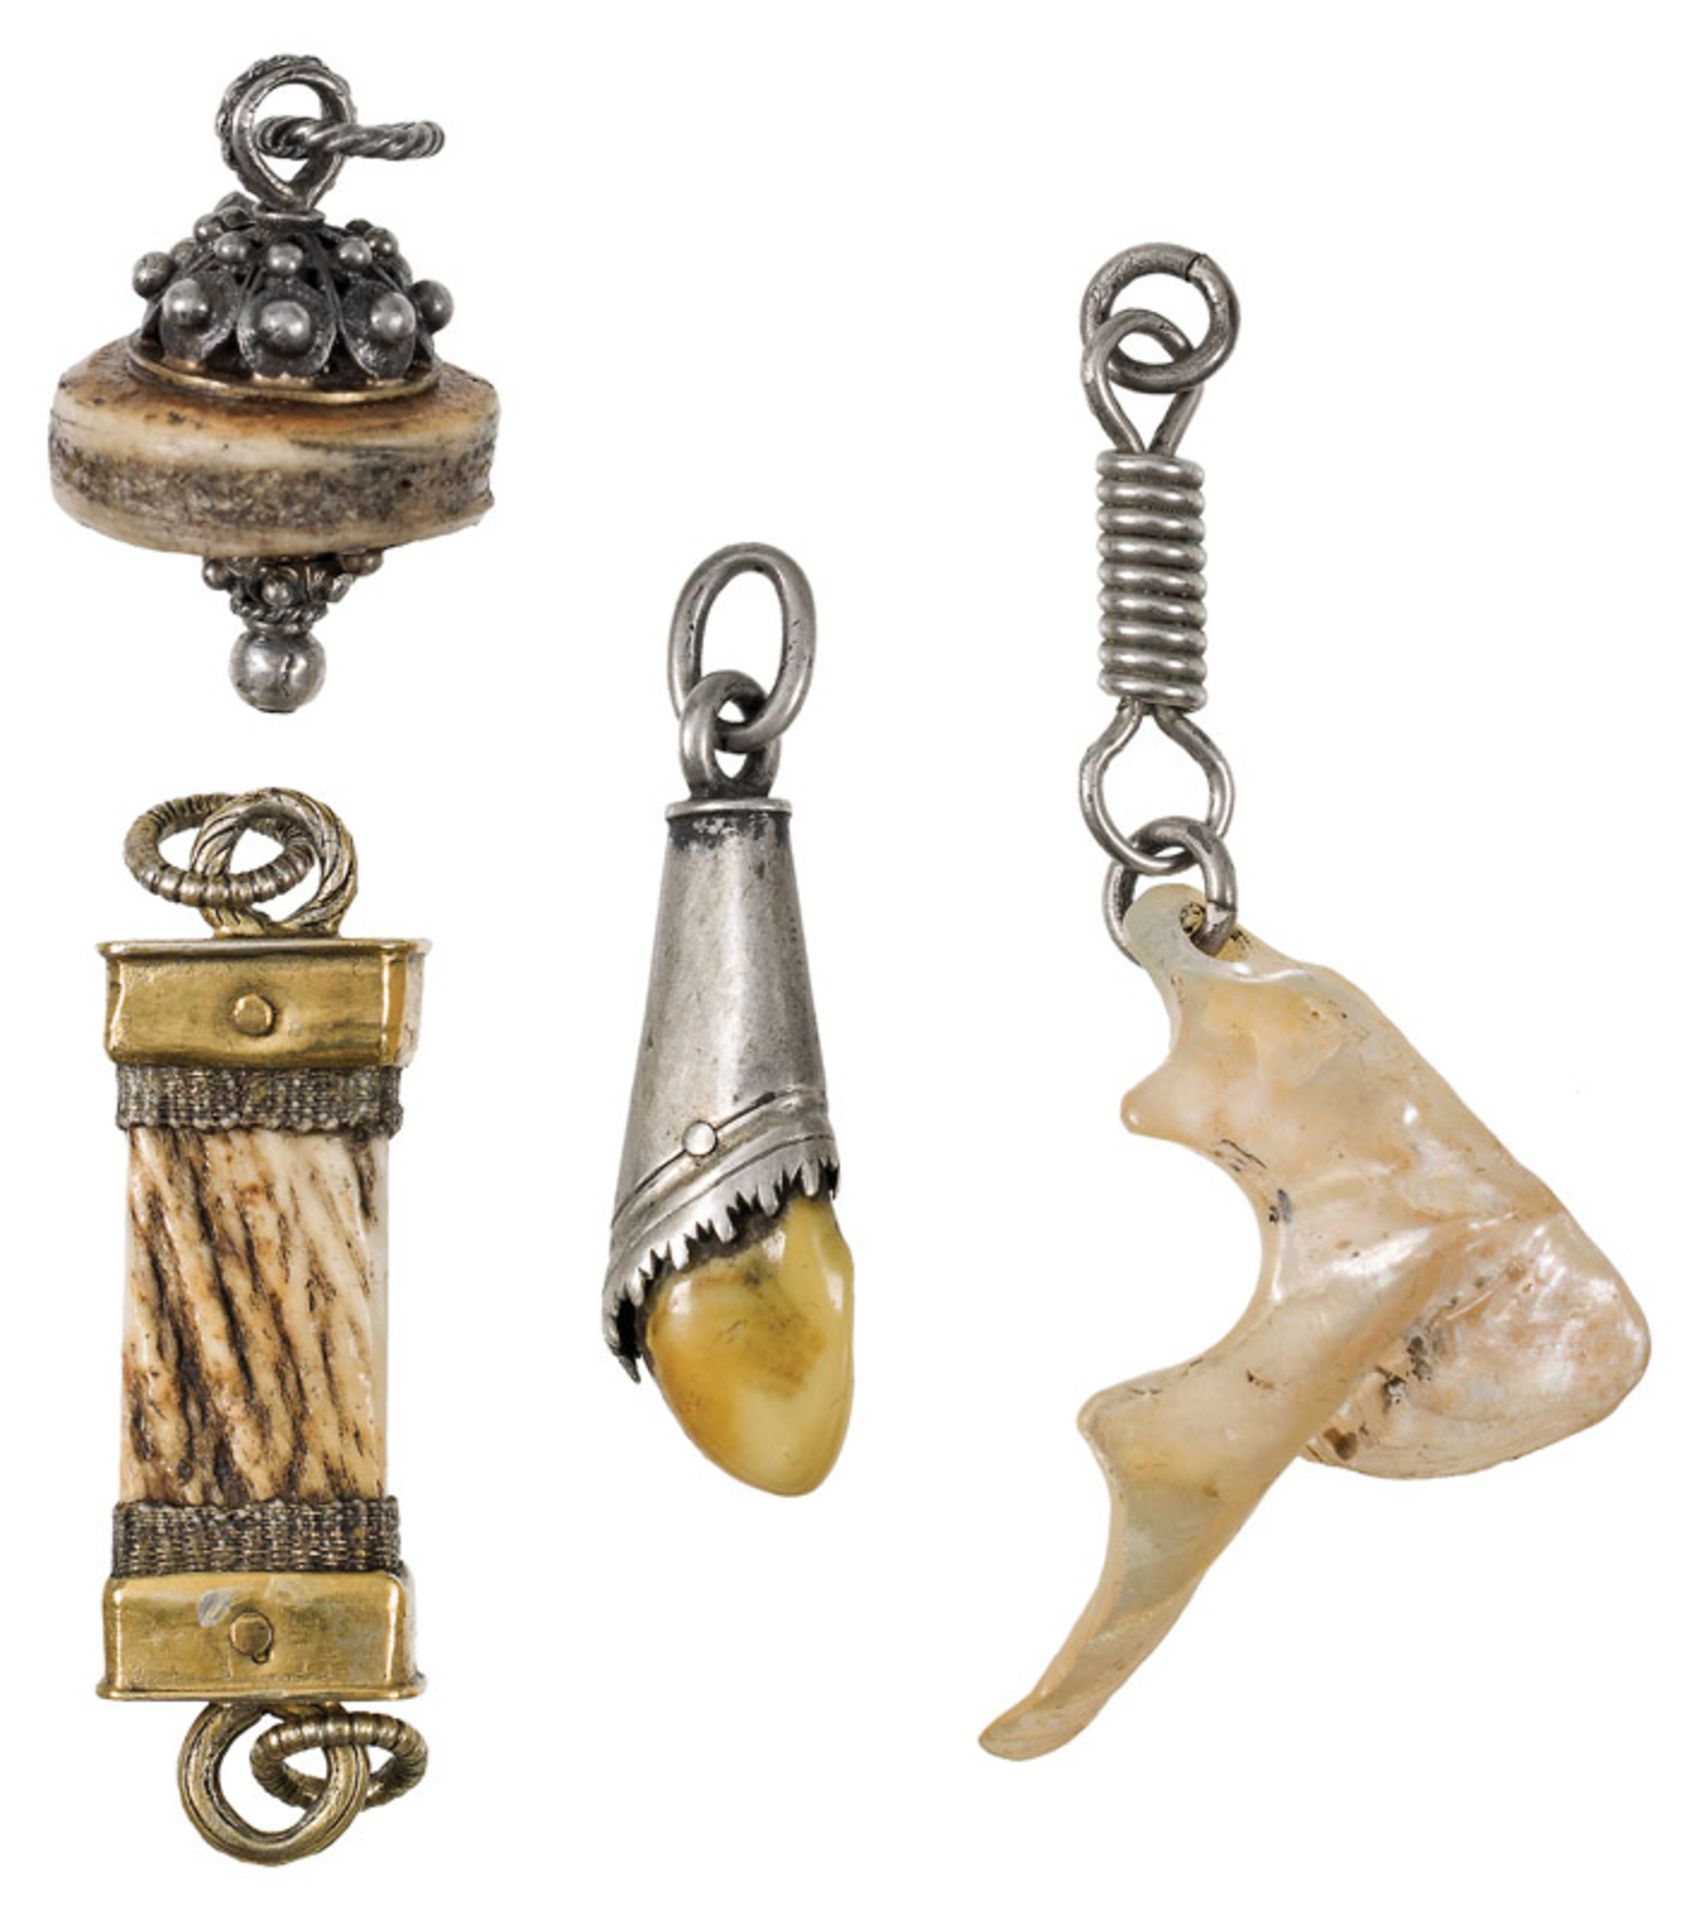 4 amulets, South German, 17th/18th century bone, tooth, nacre, silver, partly gilded; l. 3 to 4